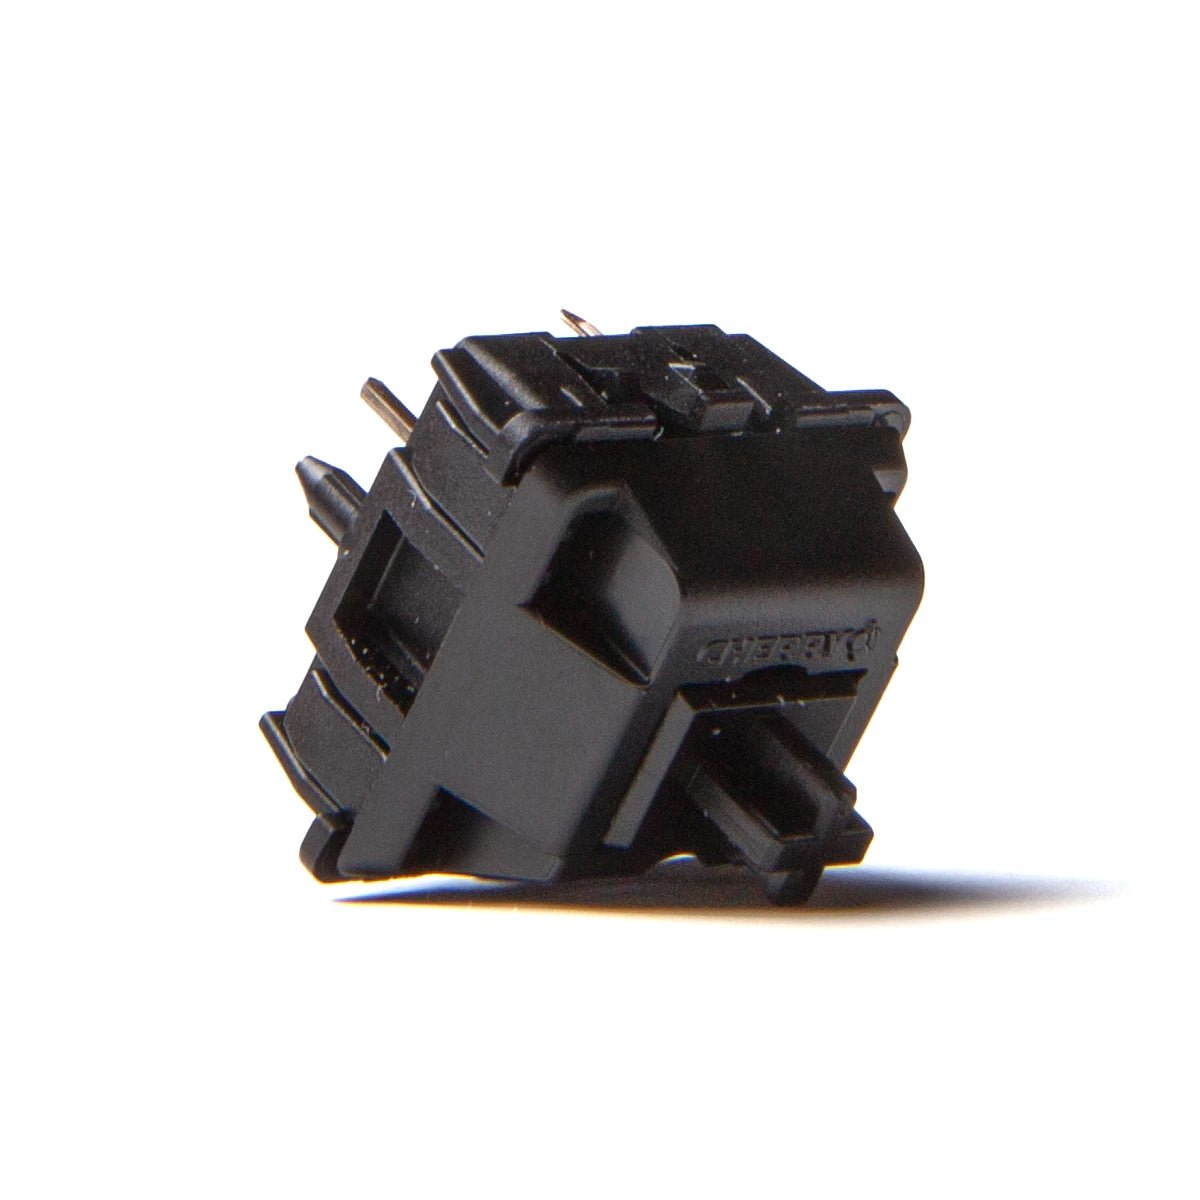 Cherry MX2A Black Linear Switches - Divinikey